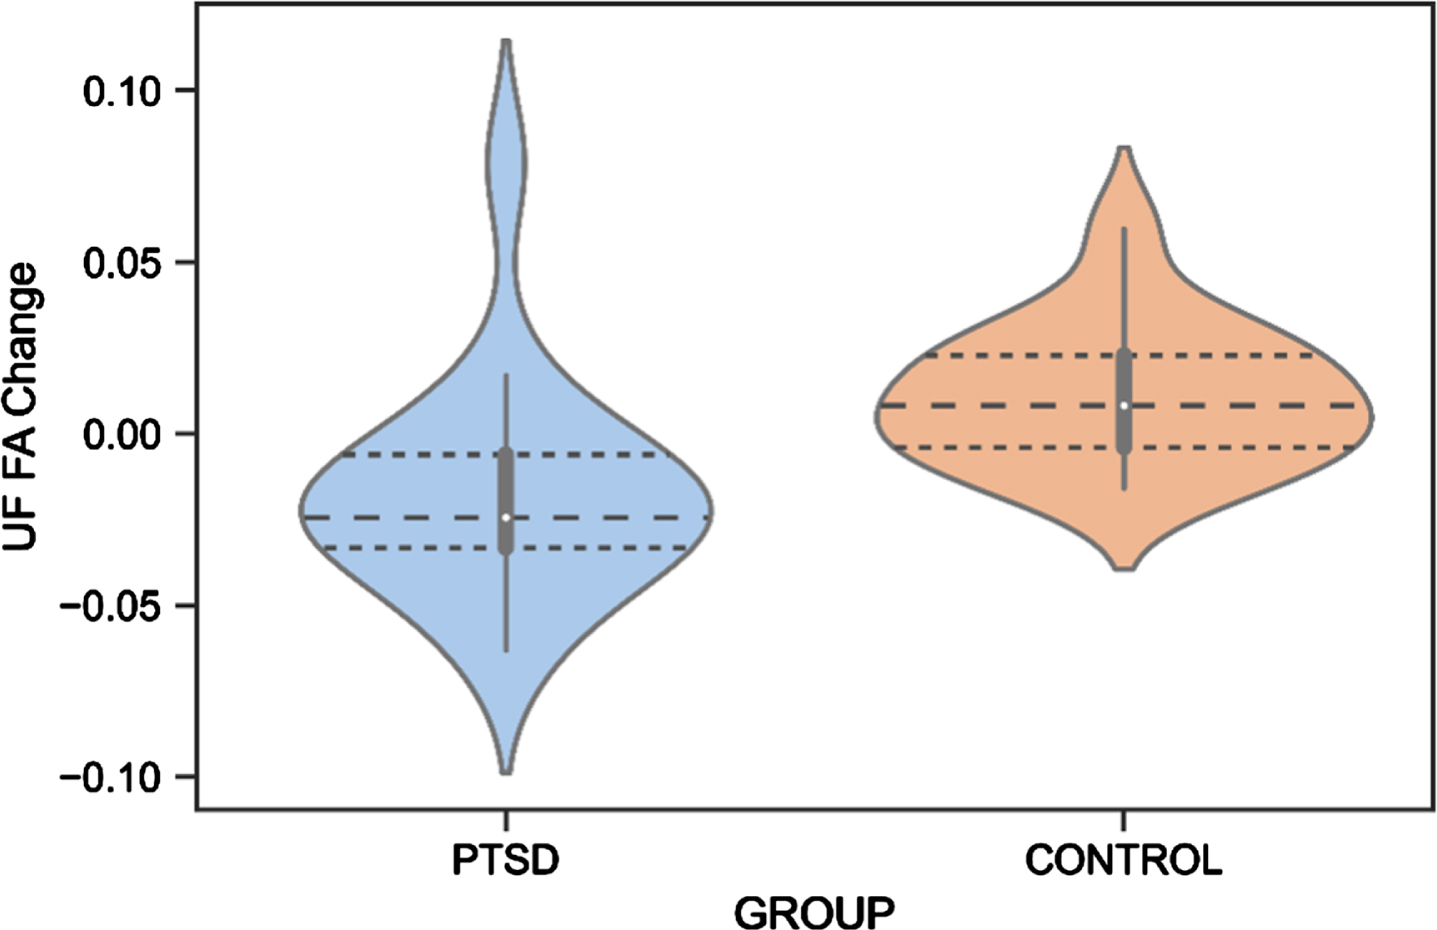 UF FA Change Difference Between Veterans with PTSD and Veteran Controls. PTSD, posttraumatic stress disorder; UF, uncinate fasciculus; FA, fractional anisotropy.